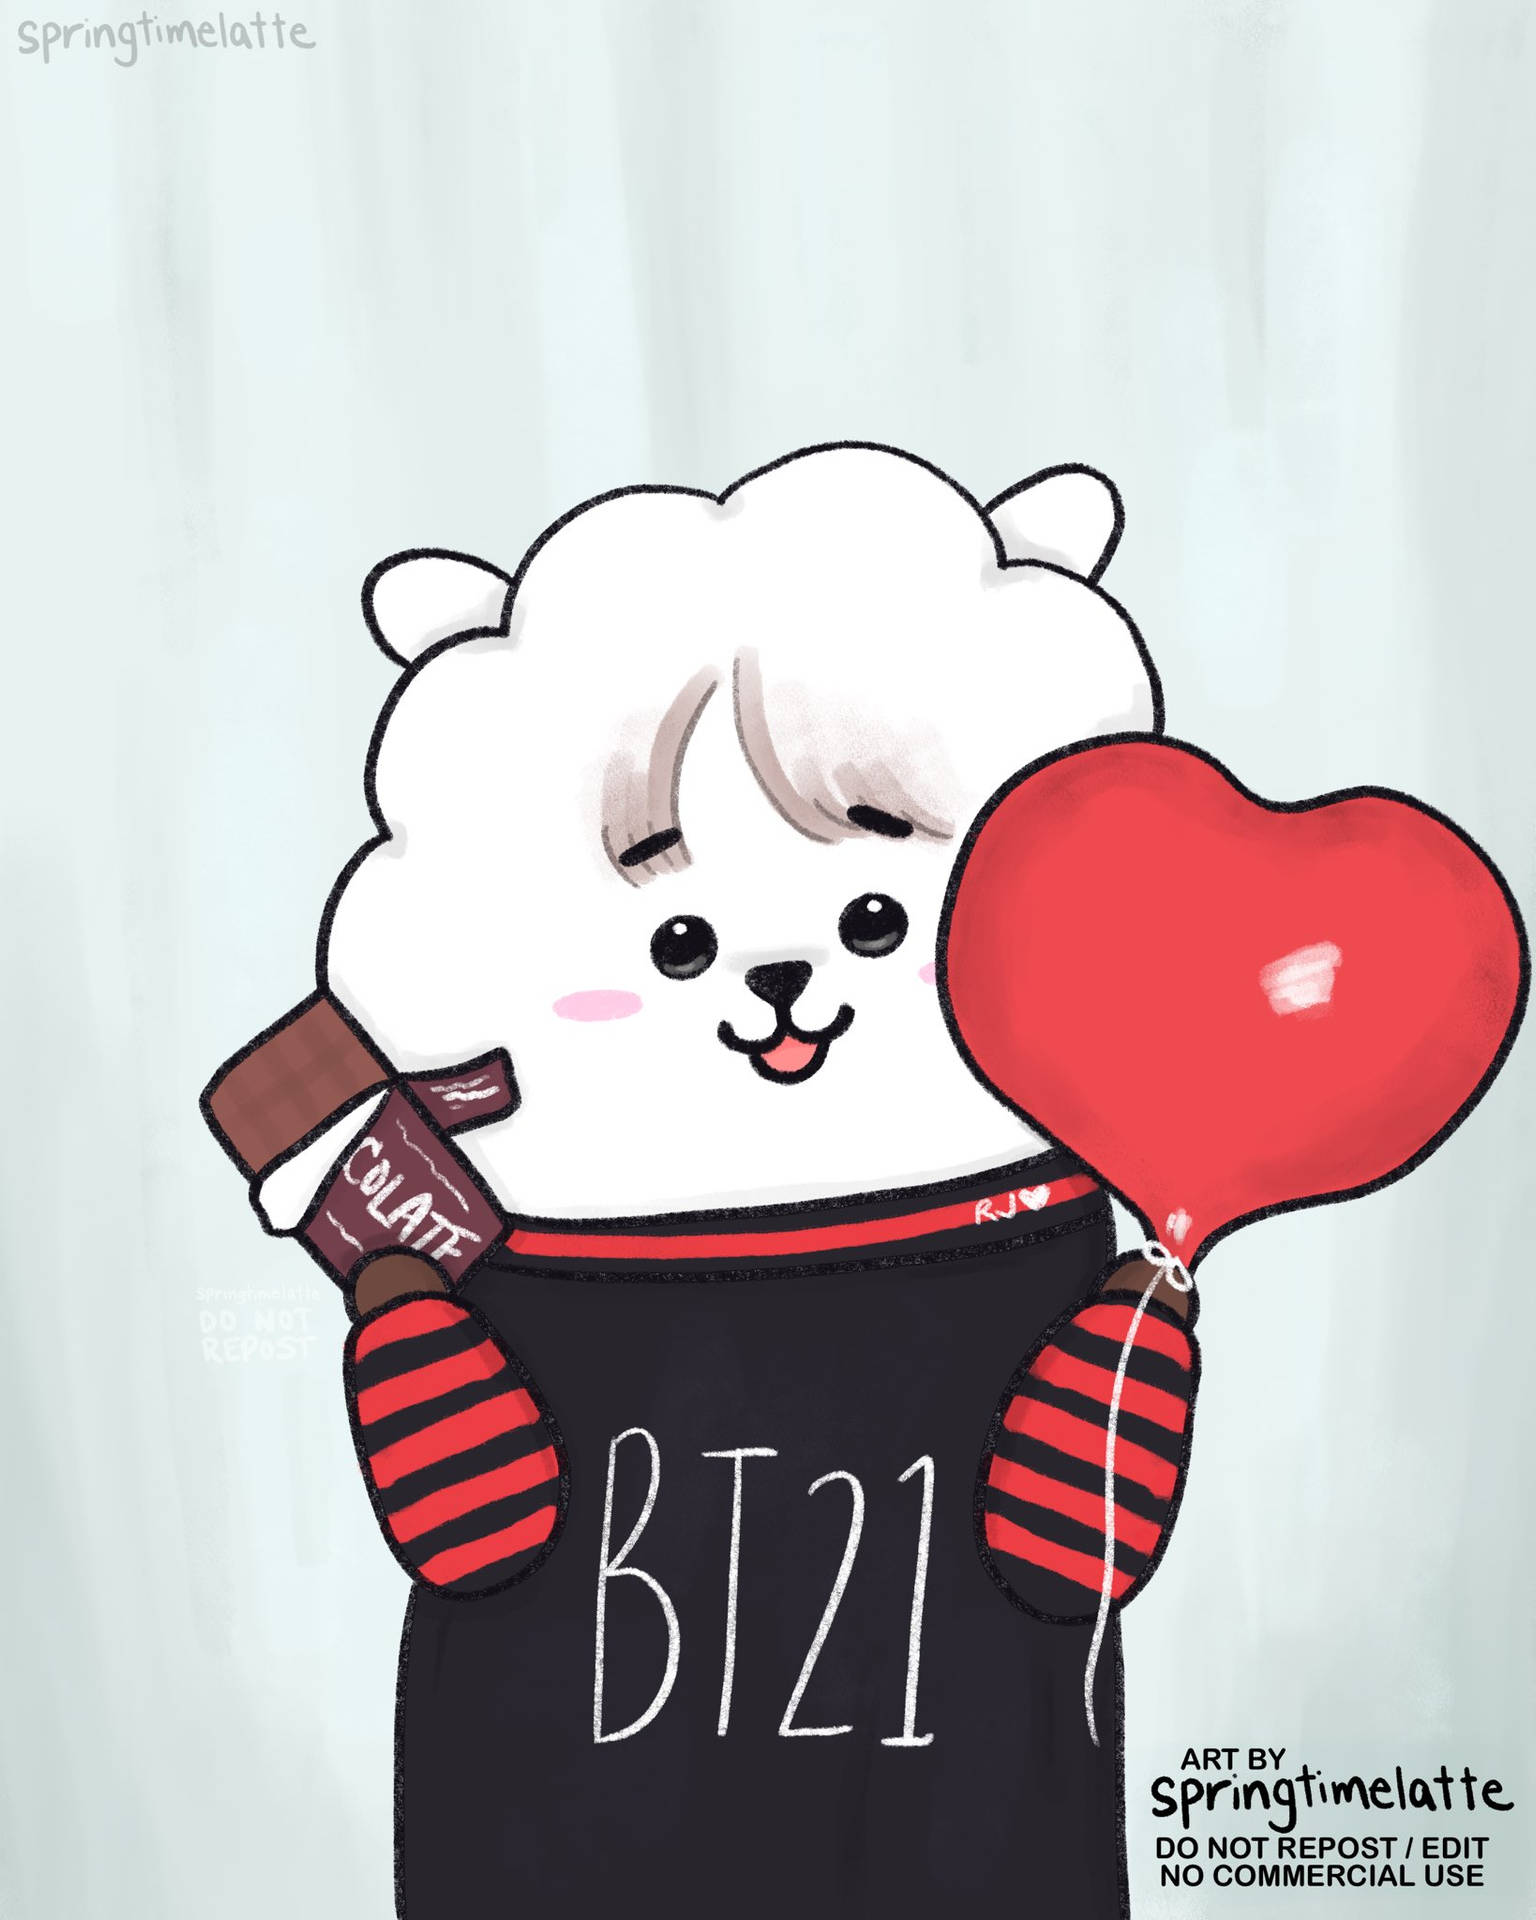 Caption: Cheerful Rj Bt21 Showing Off Its Charming Smile Wallpaper